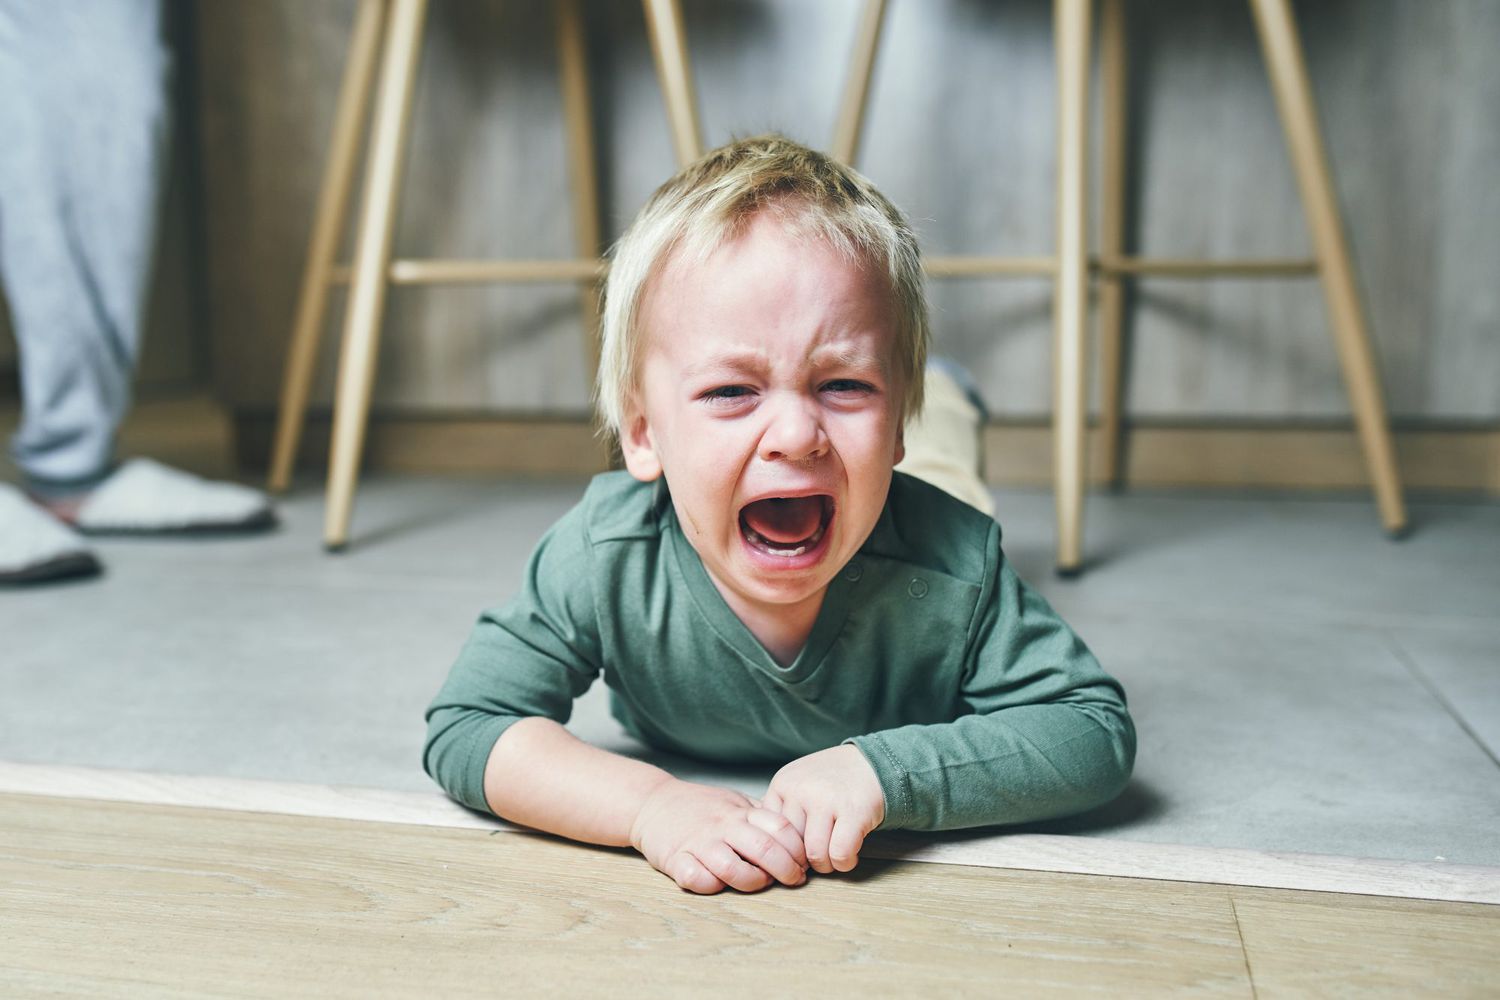 A little boy with blond hair, two years old, is lying on the floor and crying hysterically